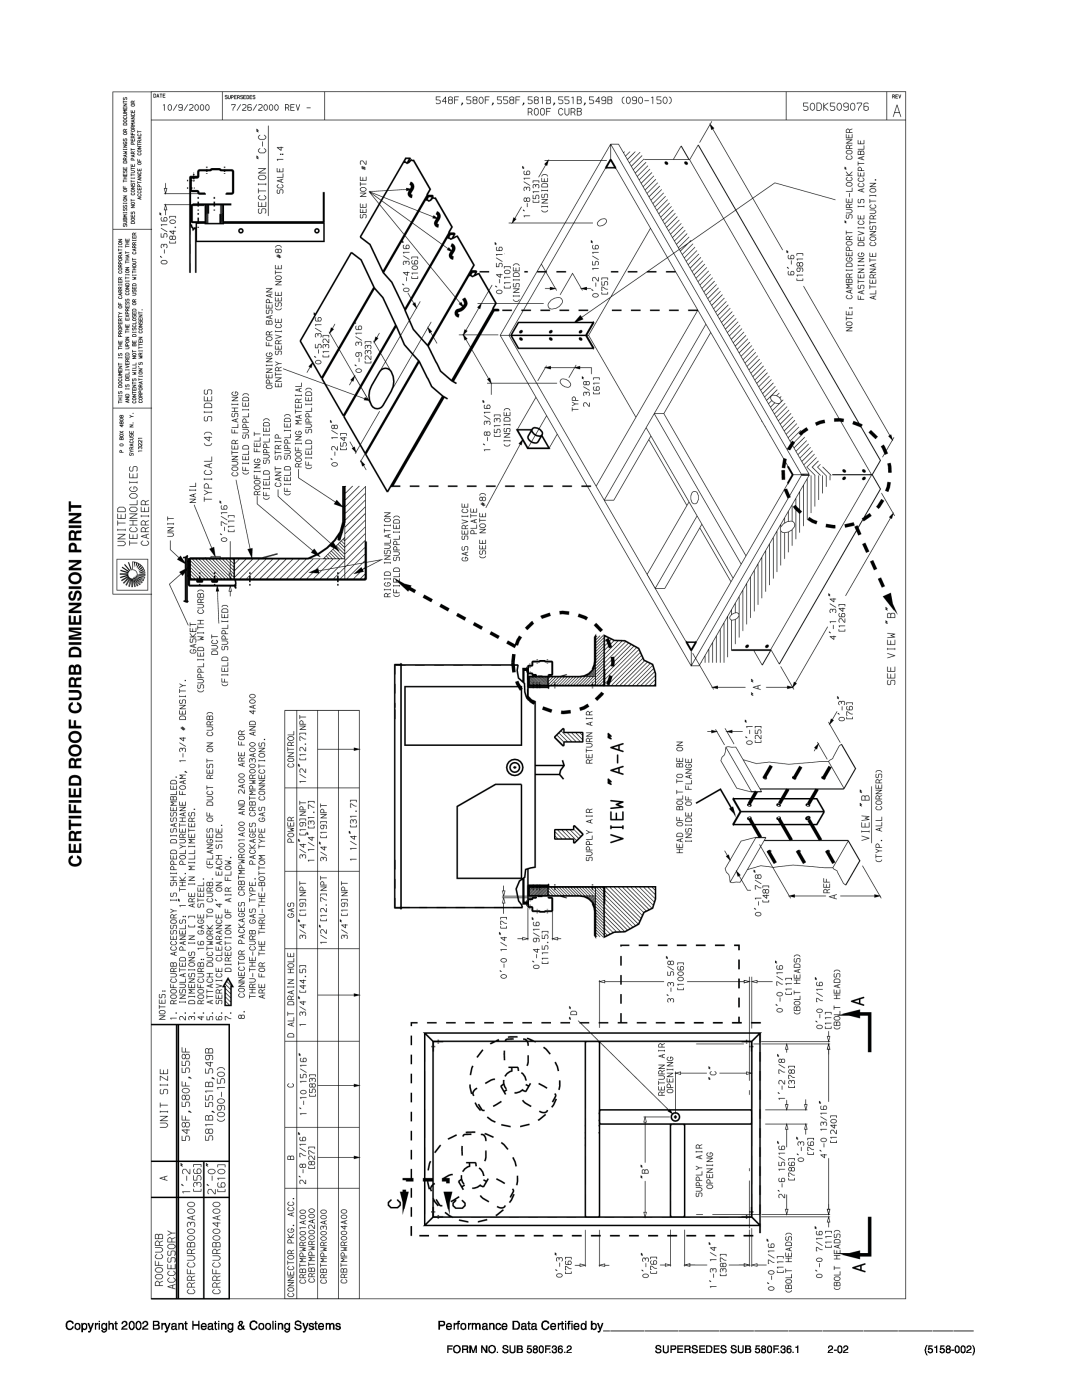 Bryant 580F036-150 Certified Roof Curb Dimension Print, Copyright 2002 Bryant Heating & Cooling Systems, 2-02, 5158-002 